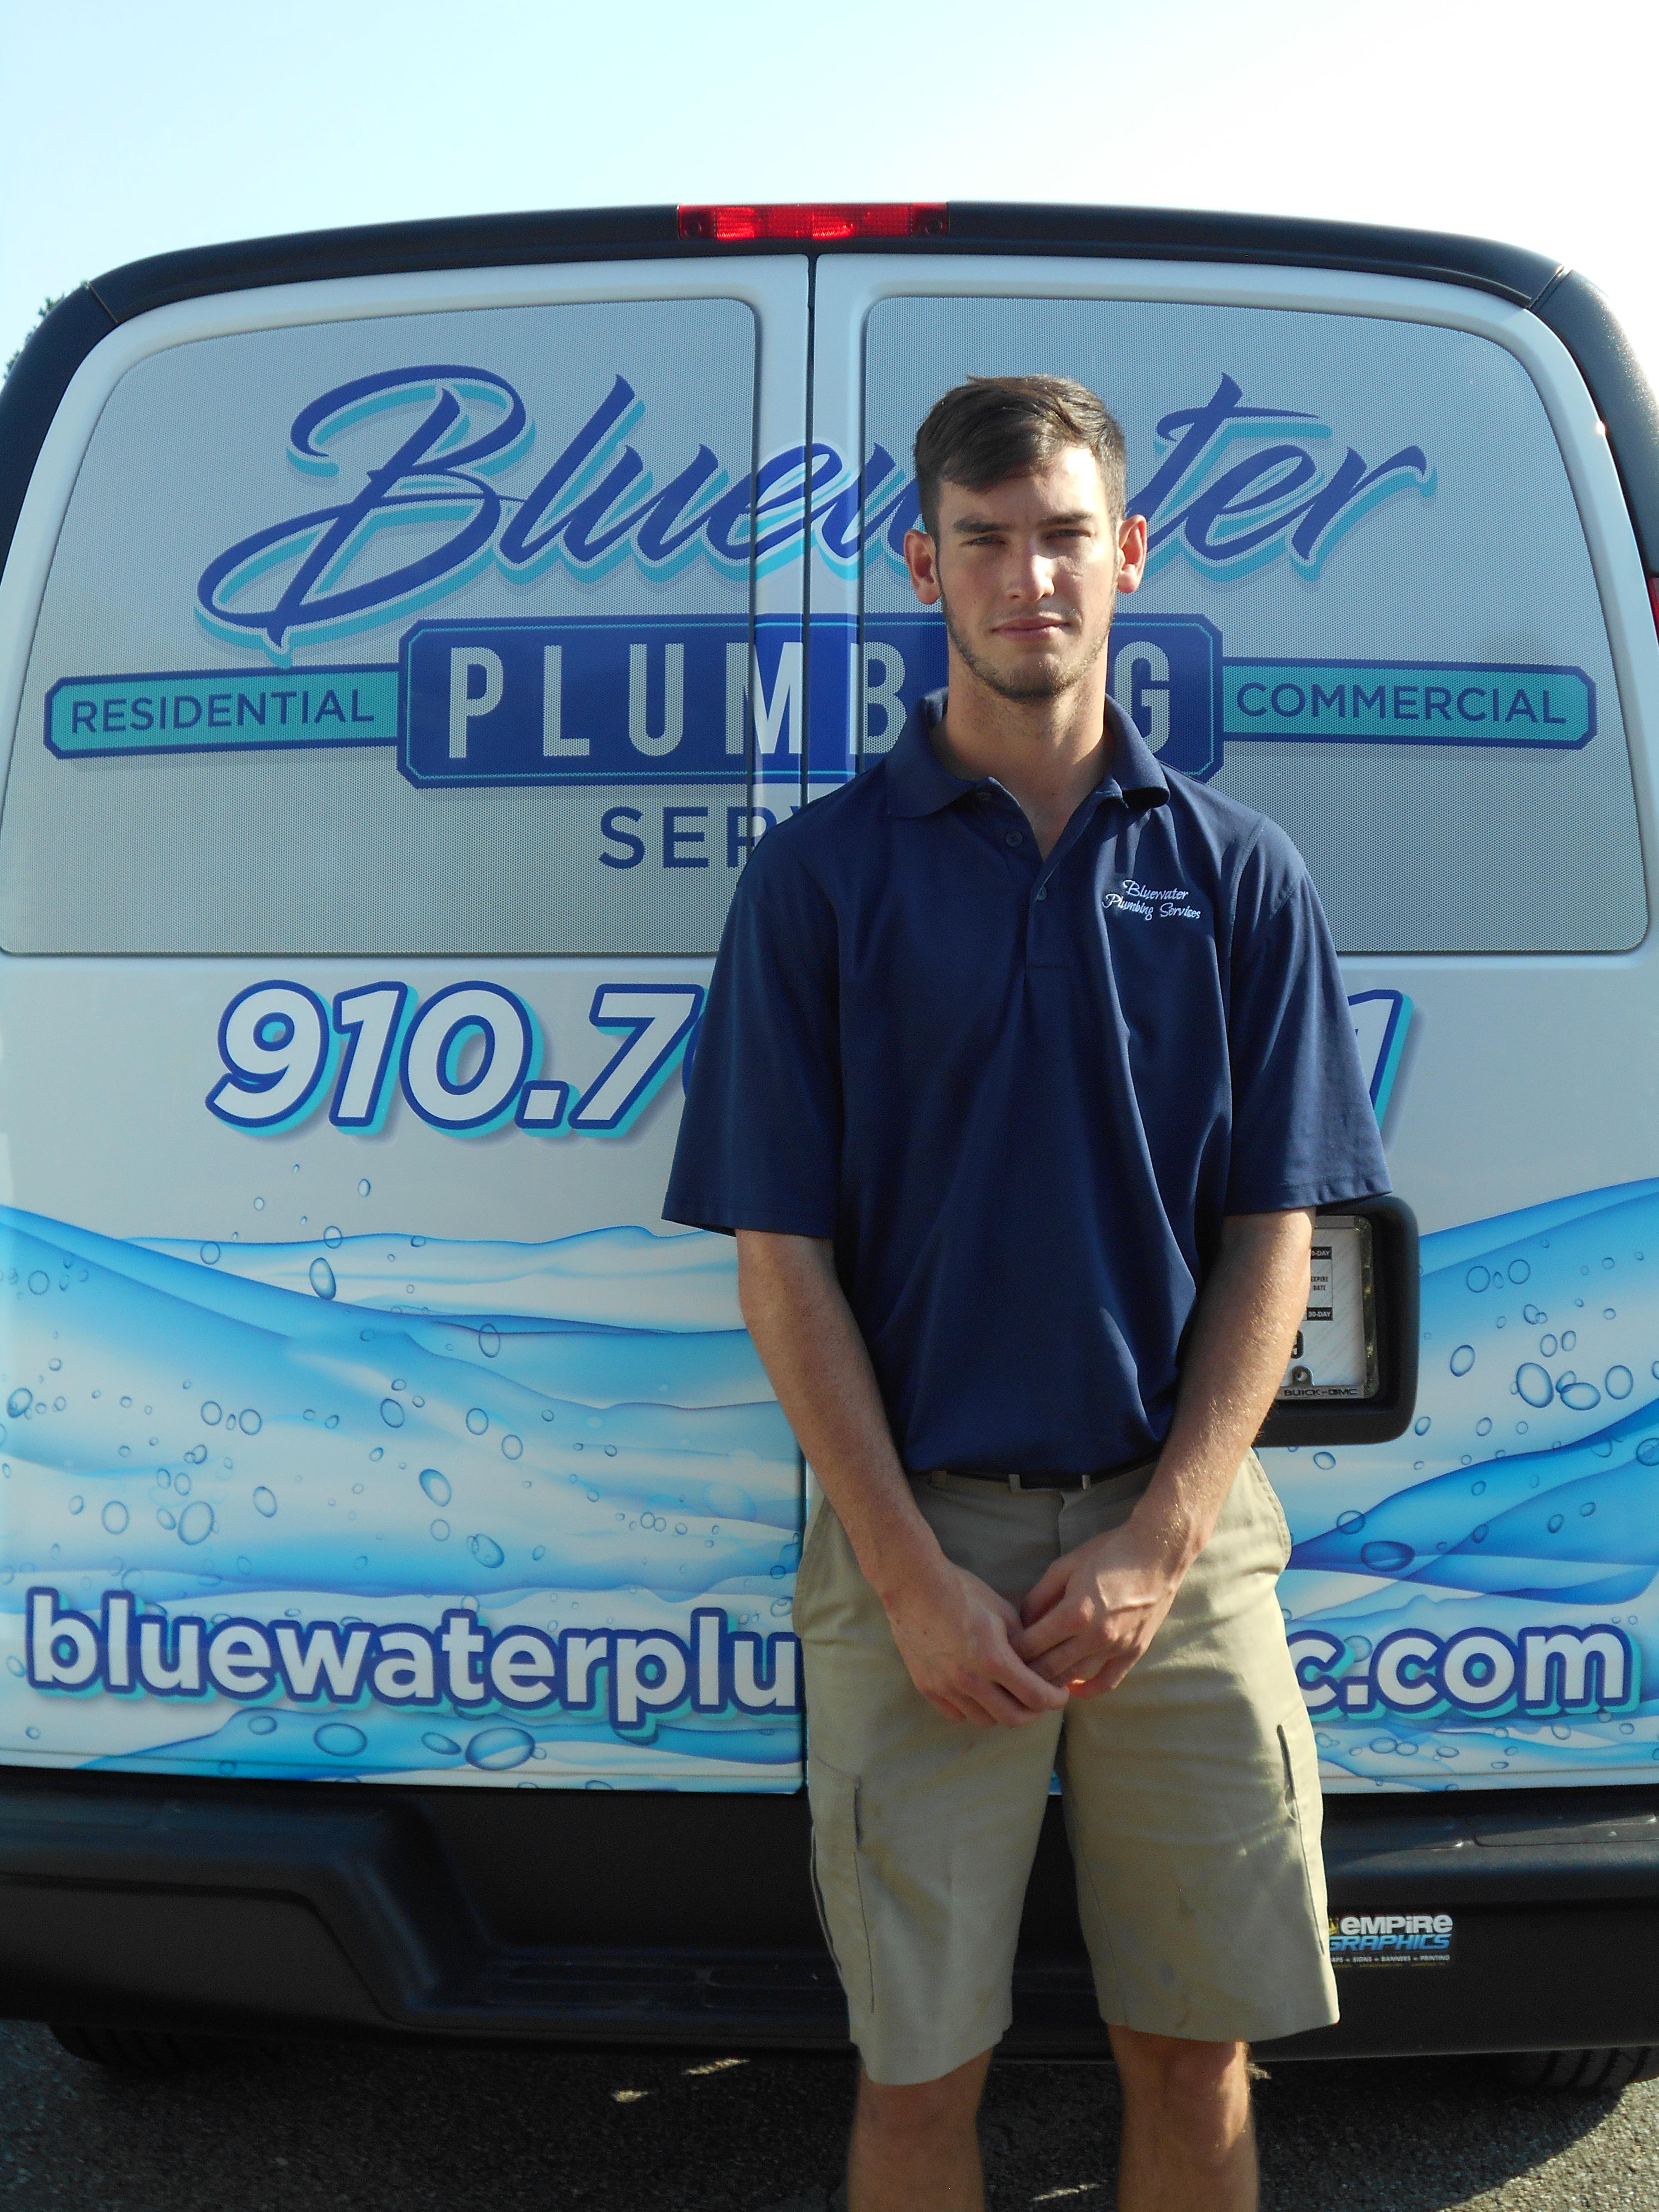 We are the top local plumber serving residential, commercial, and vacation rentals!  Whether it's a  Bluewater Plumbing Service Wilmington (910)769-7051